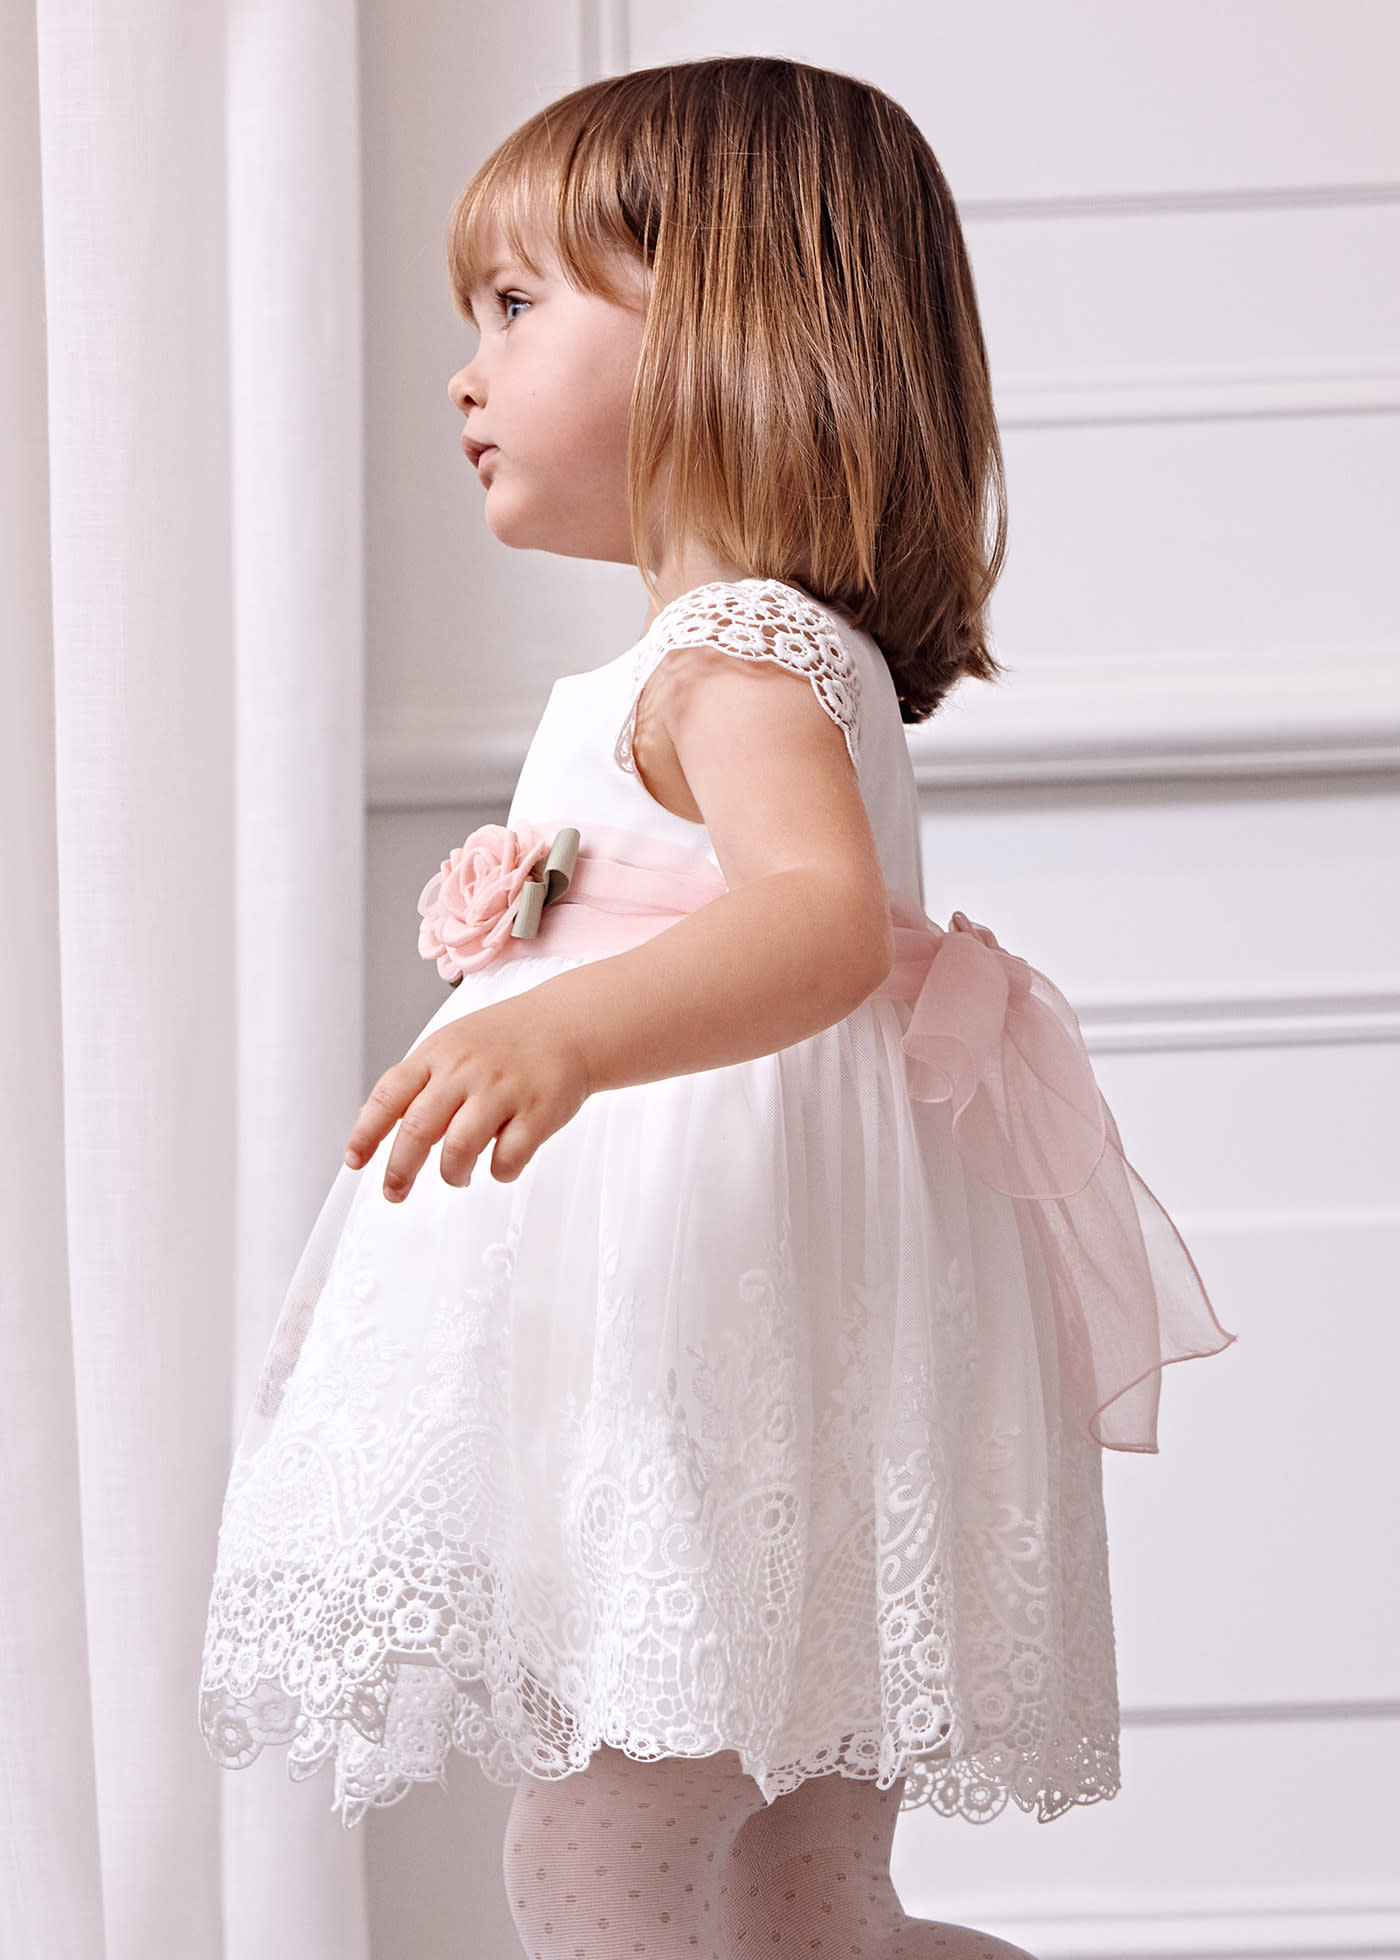 Baby Tulle Embroidered Guipure Dress